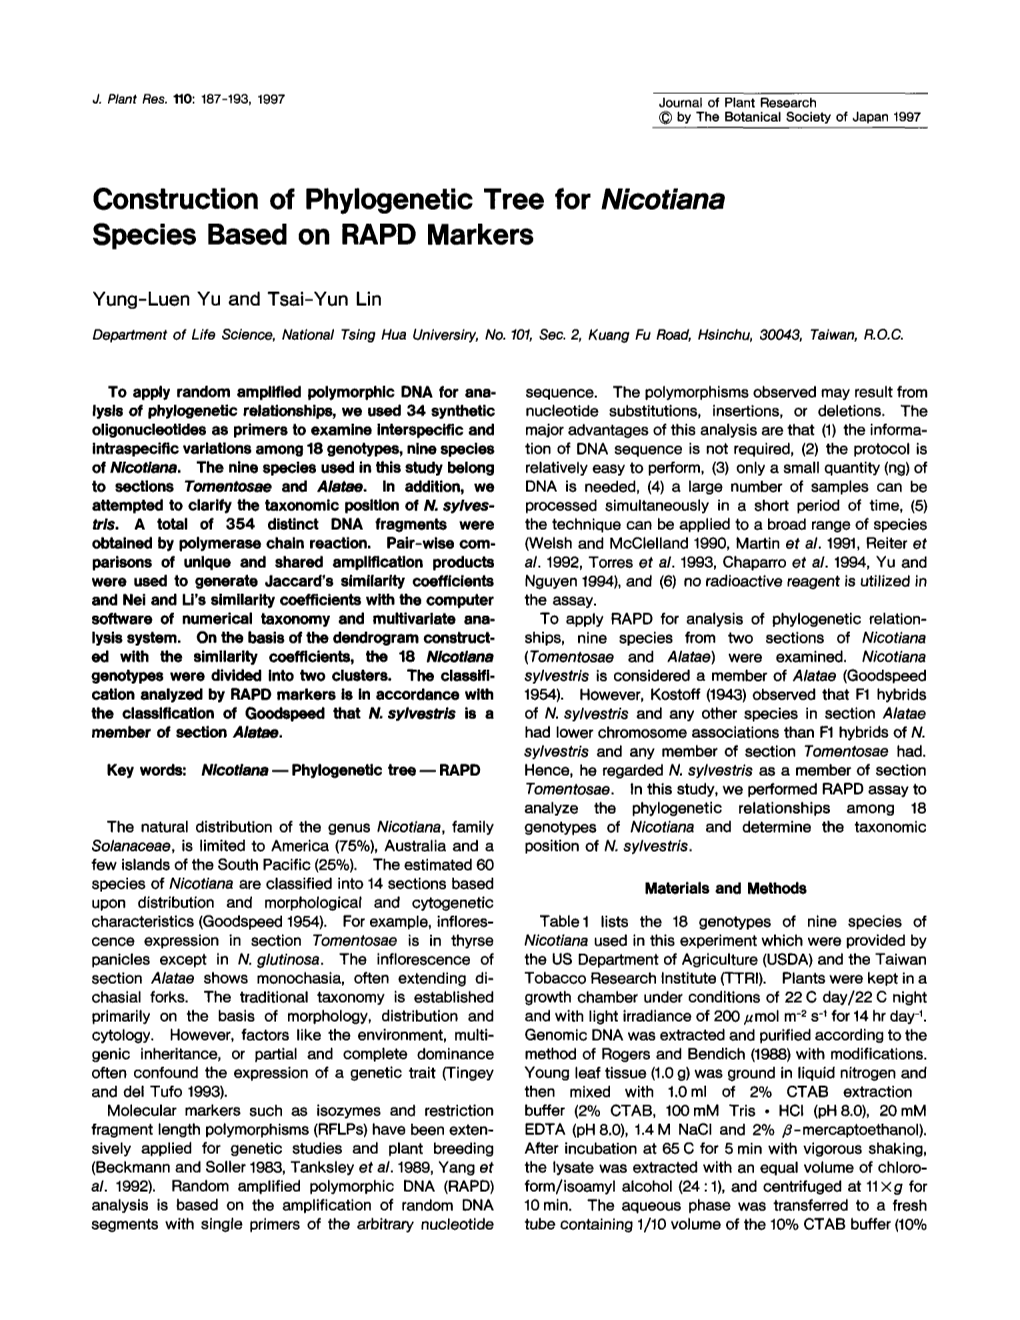 Construction of Phylogenetic Tree for &lt;Emphasis Type="Italic"&gt;Nicotiana